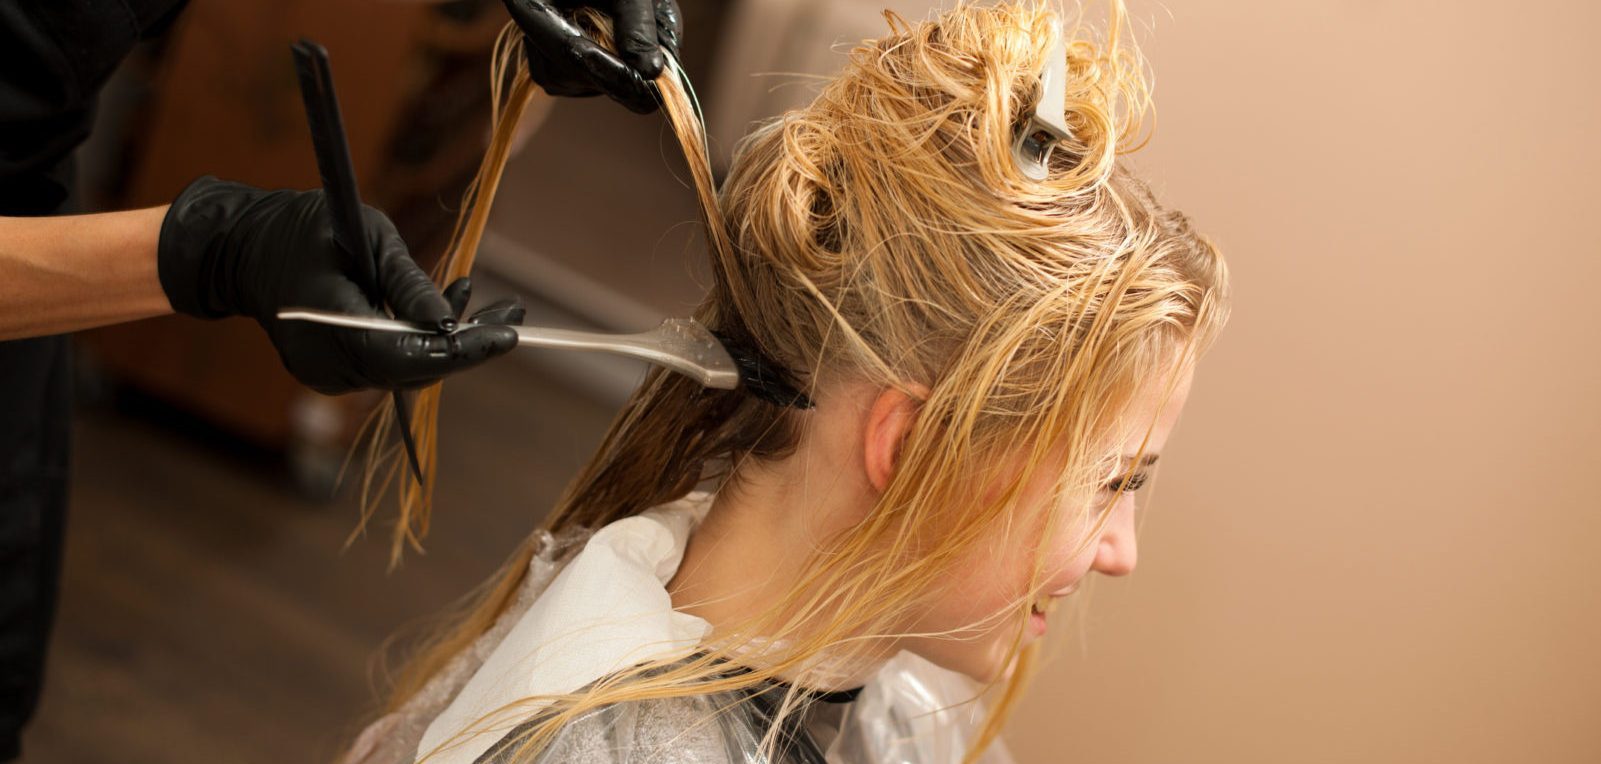 How to Fix Hair Damage from Bleach